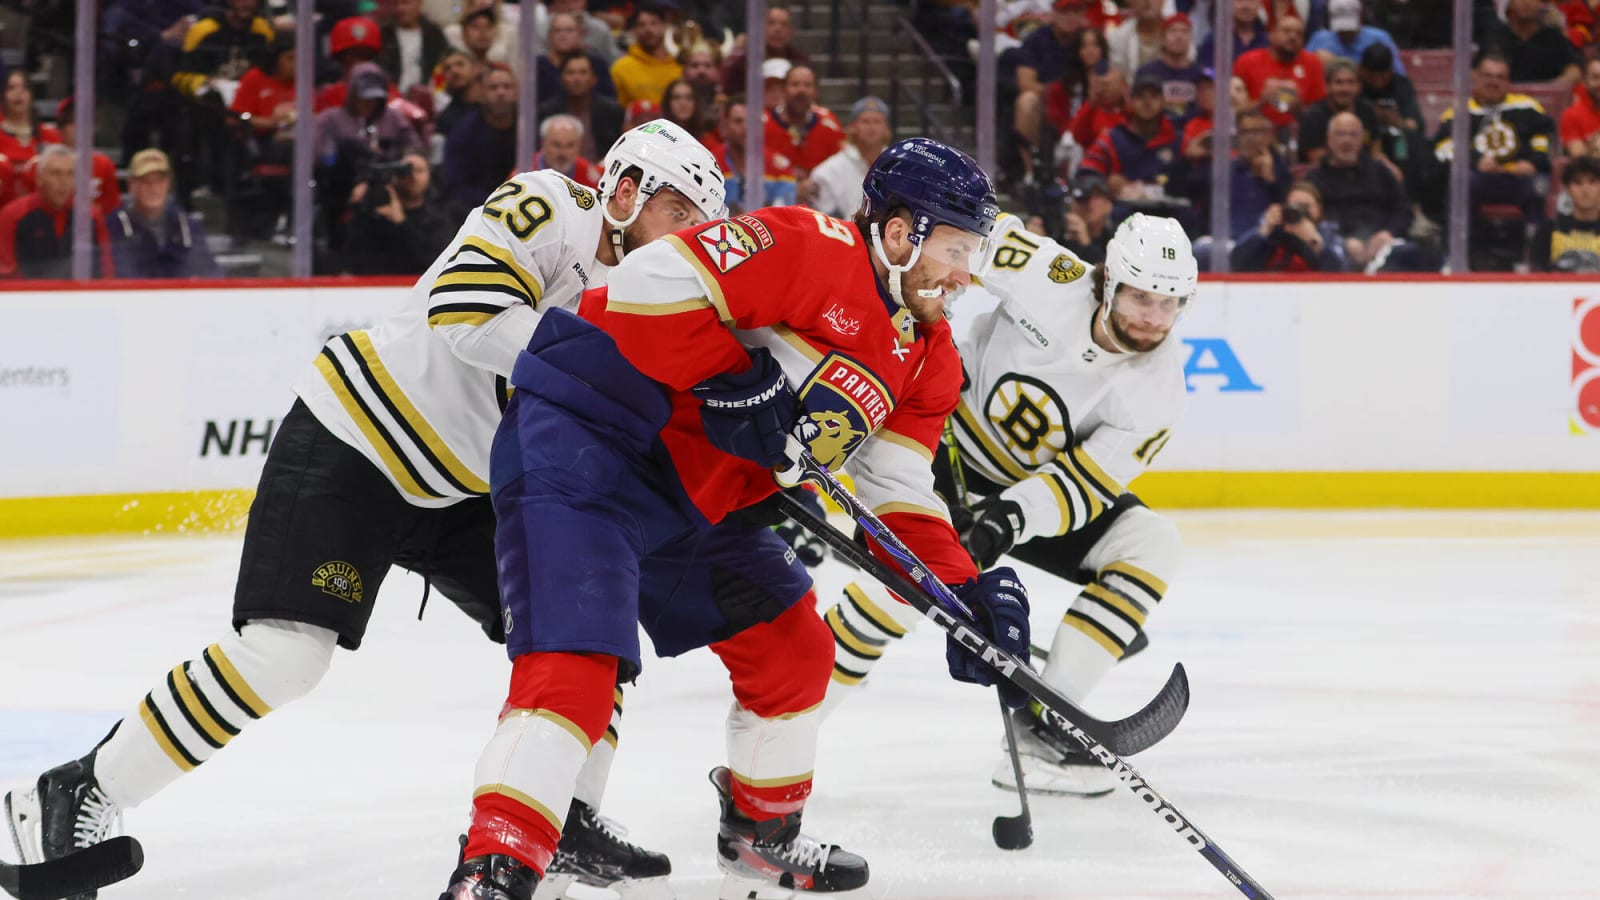 Panthers Can’t Afford to Give Bruins Any Momentum in Game 6